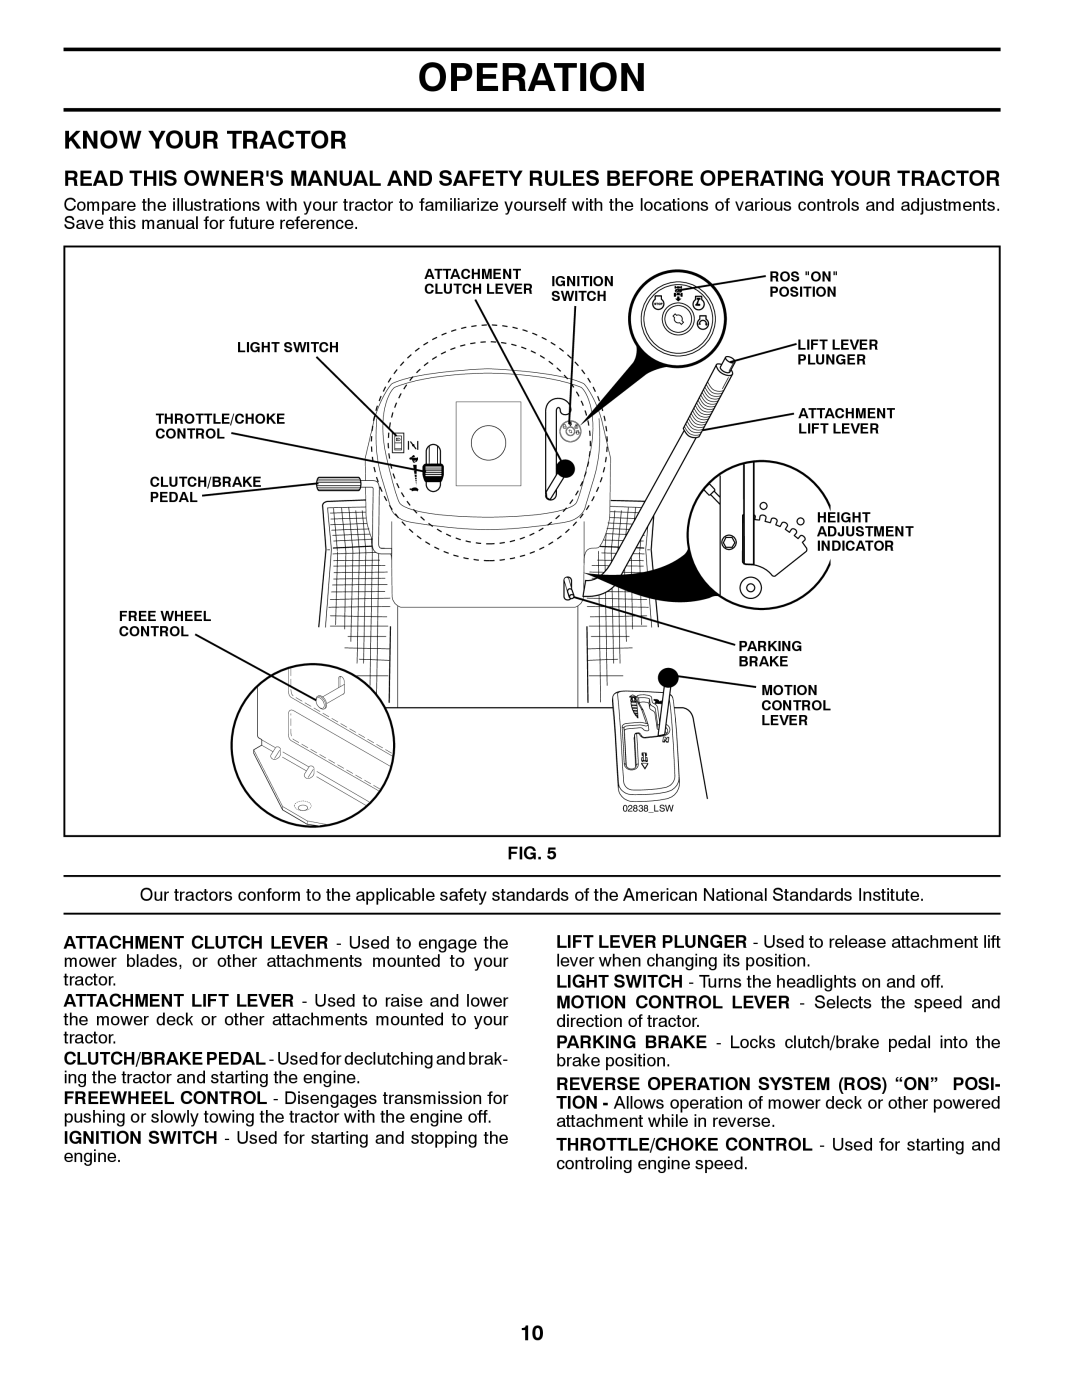 Husqvarna LTH1797 owner manual Know Your Tractor, Operation 